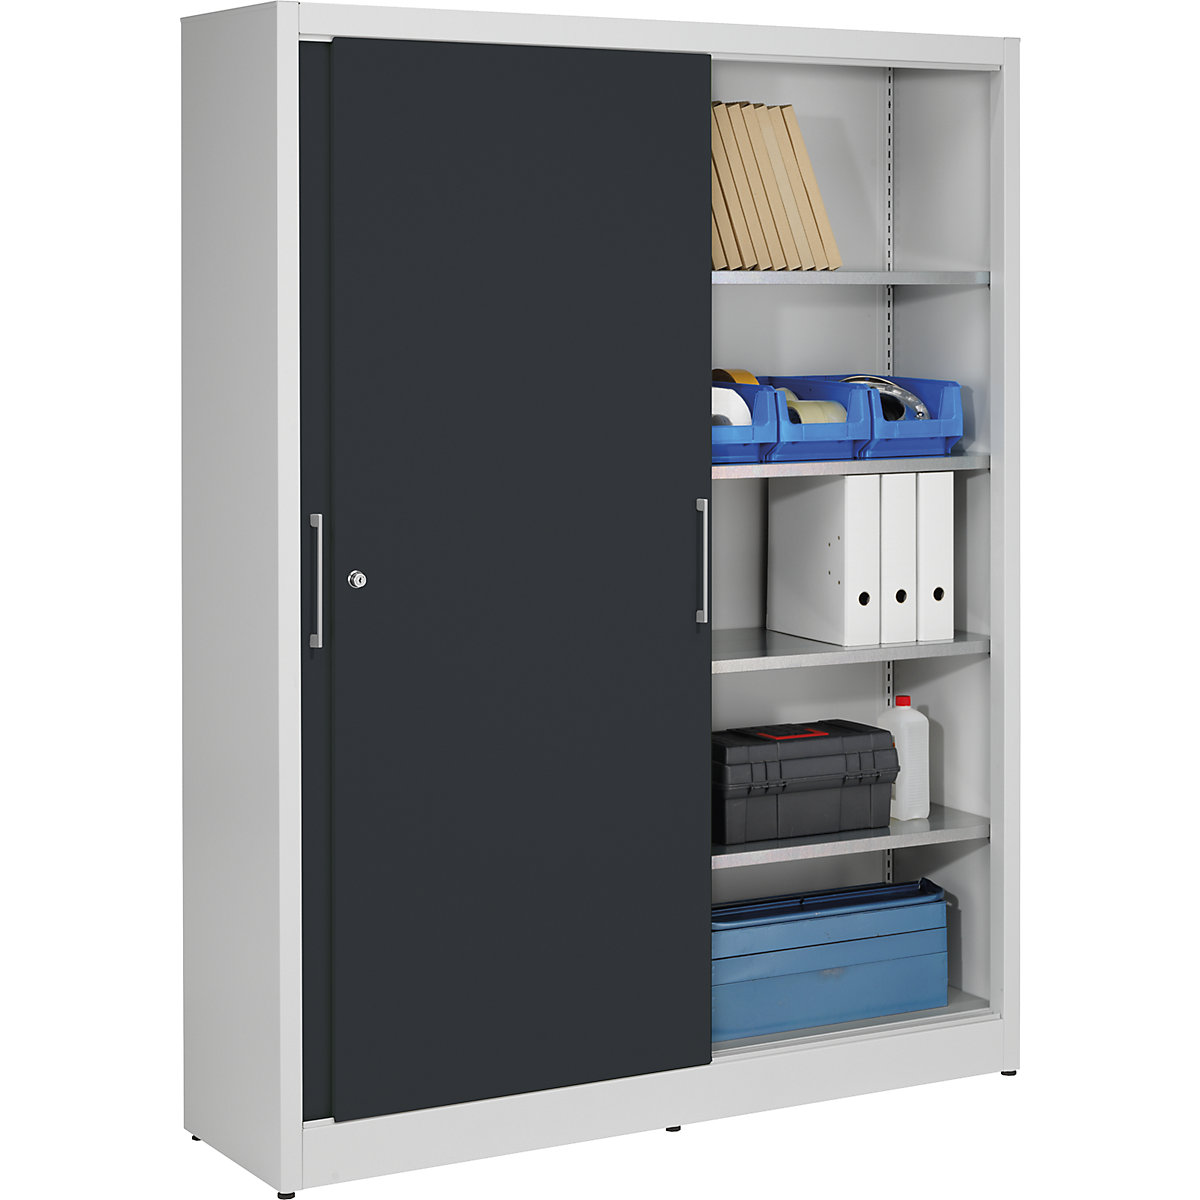 Sliding door cupboard, height 1950 mm – eurokraft pro, with centre partition and 2 x 4 shelves, width 1500 mm, depth 420 mm, doors charcoal RAL 7016-4